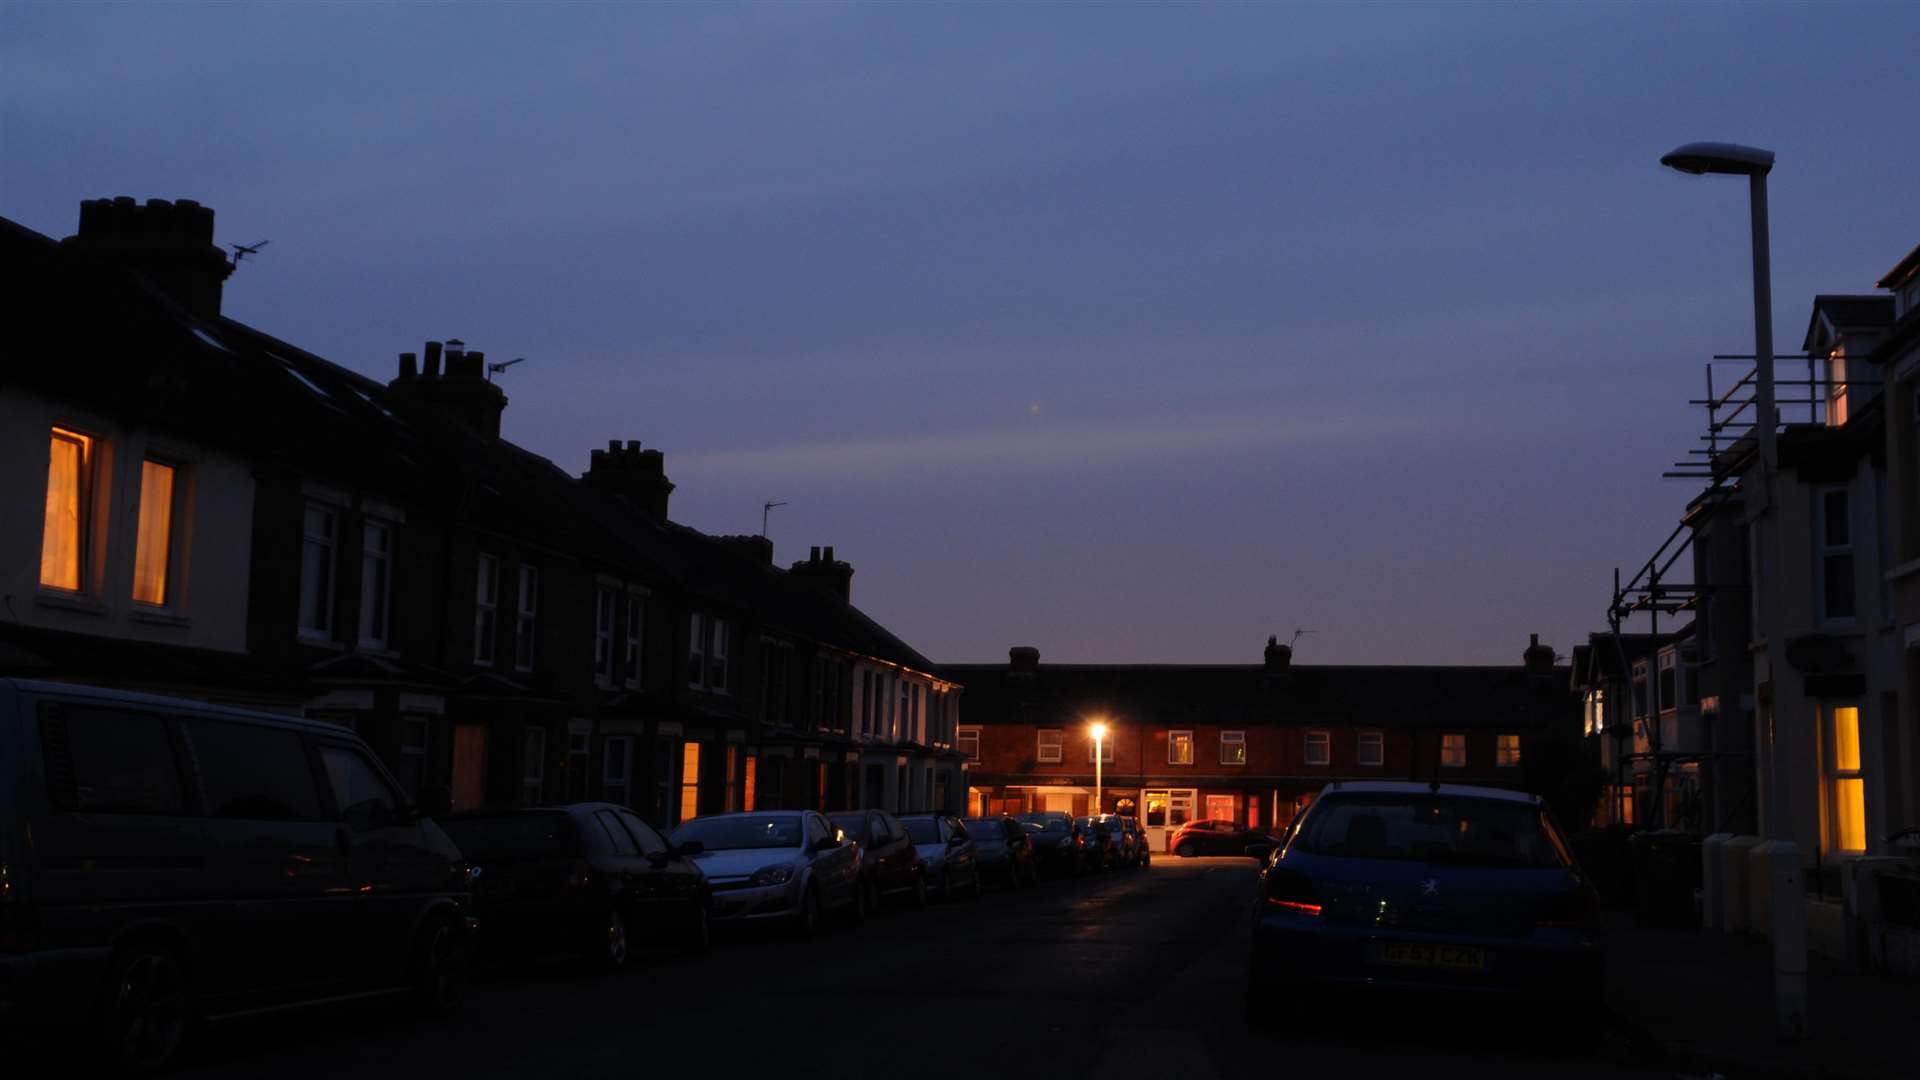 KCC was accused of failing to save any money by switching off streetlights